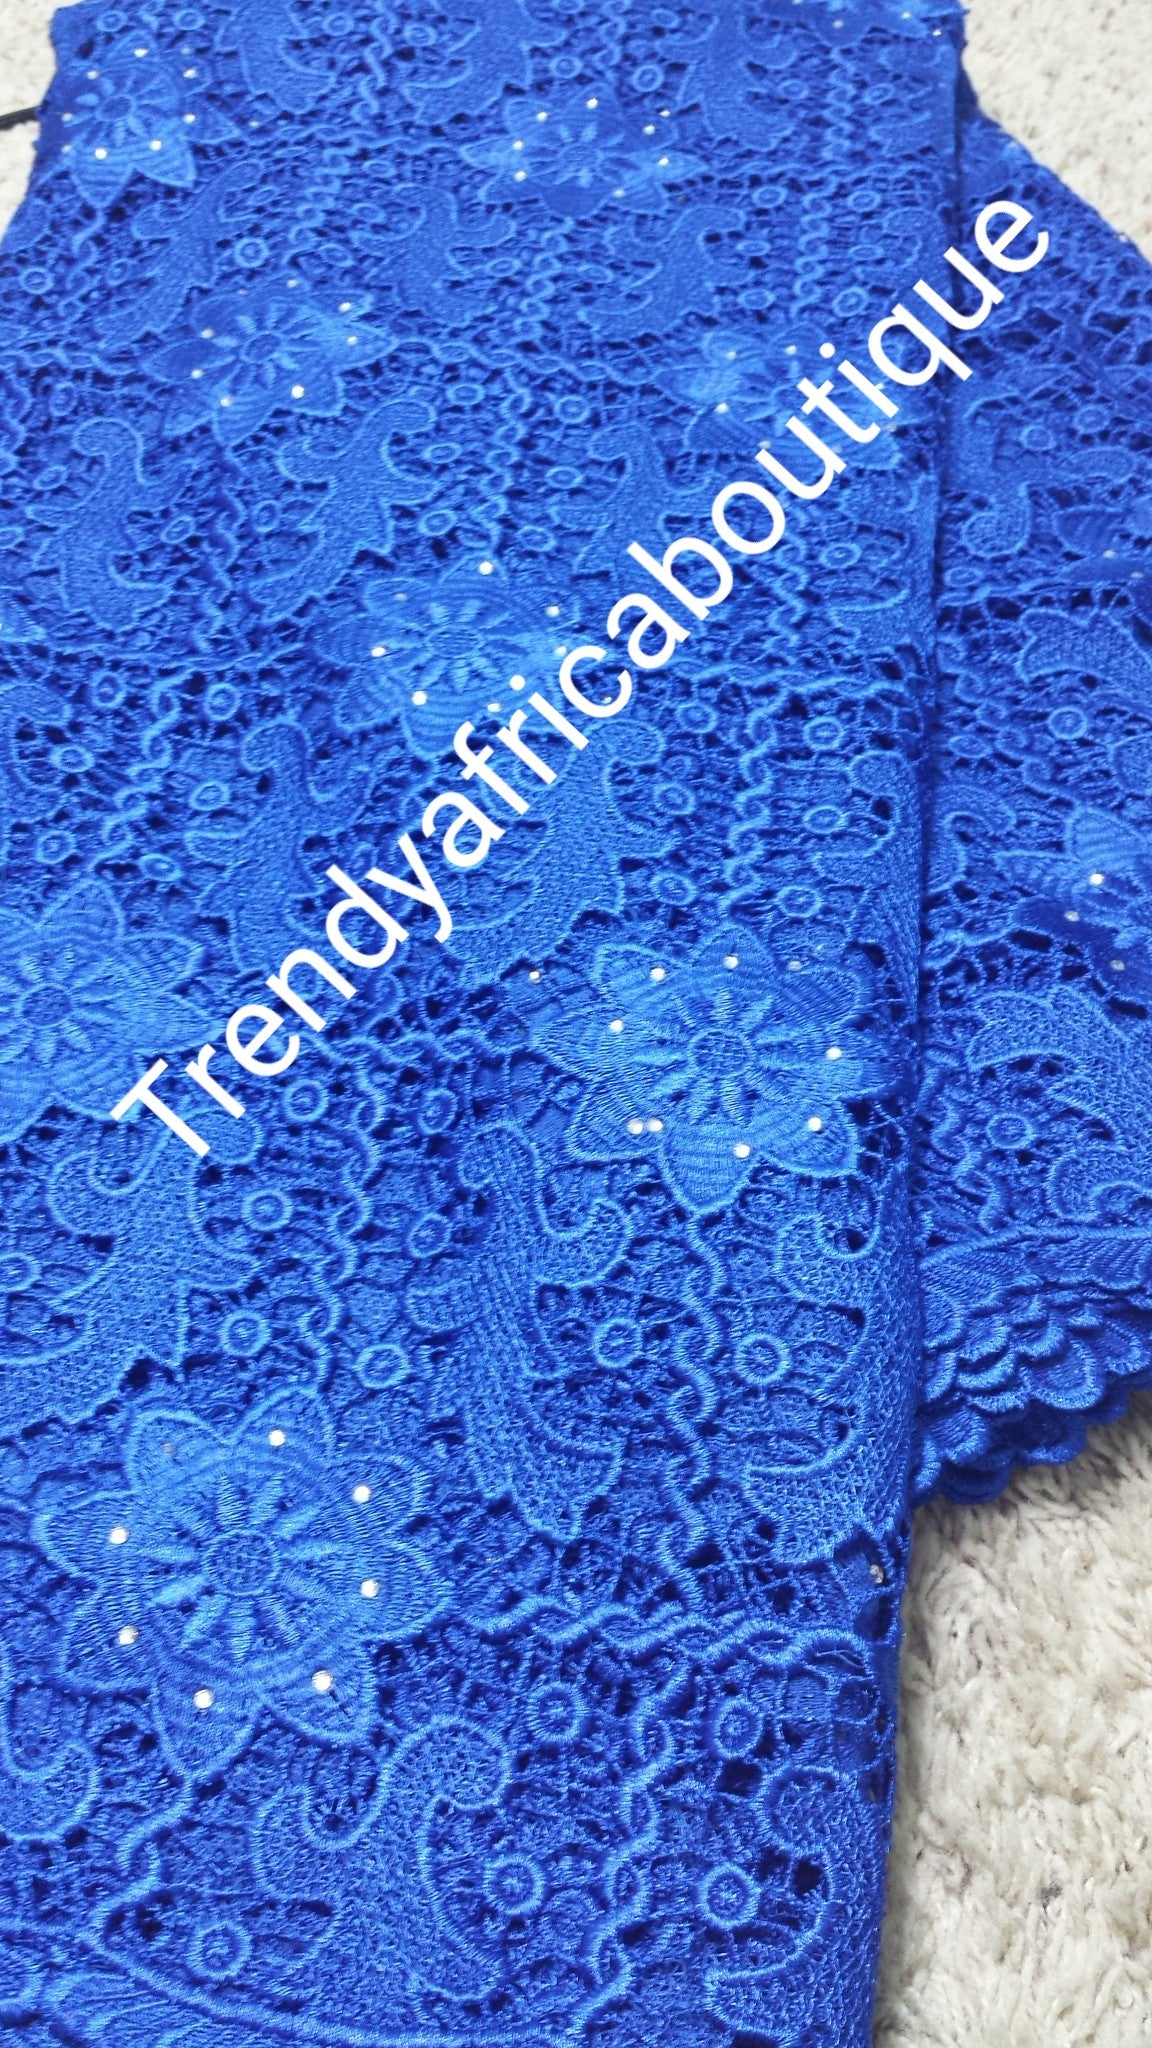 Royal blue Cord-lace fabric with stones for Nigerian party dress. Africa Cord/guipure swiss lace fabric